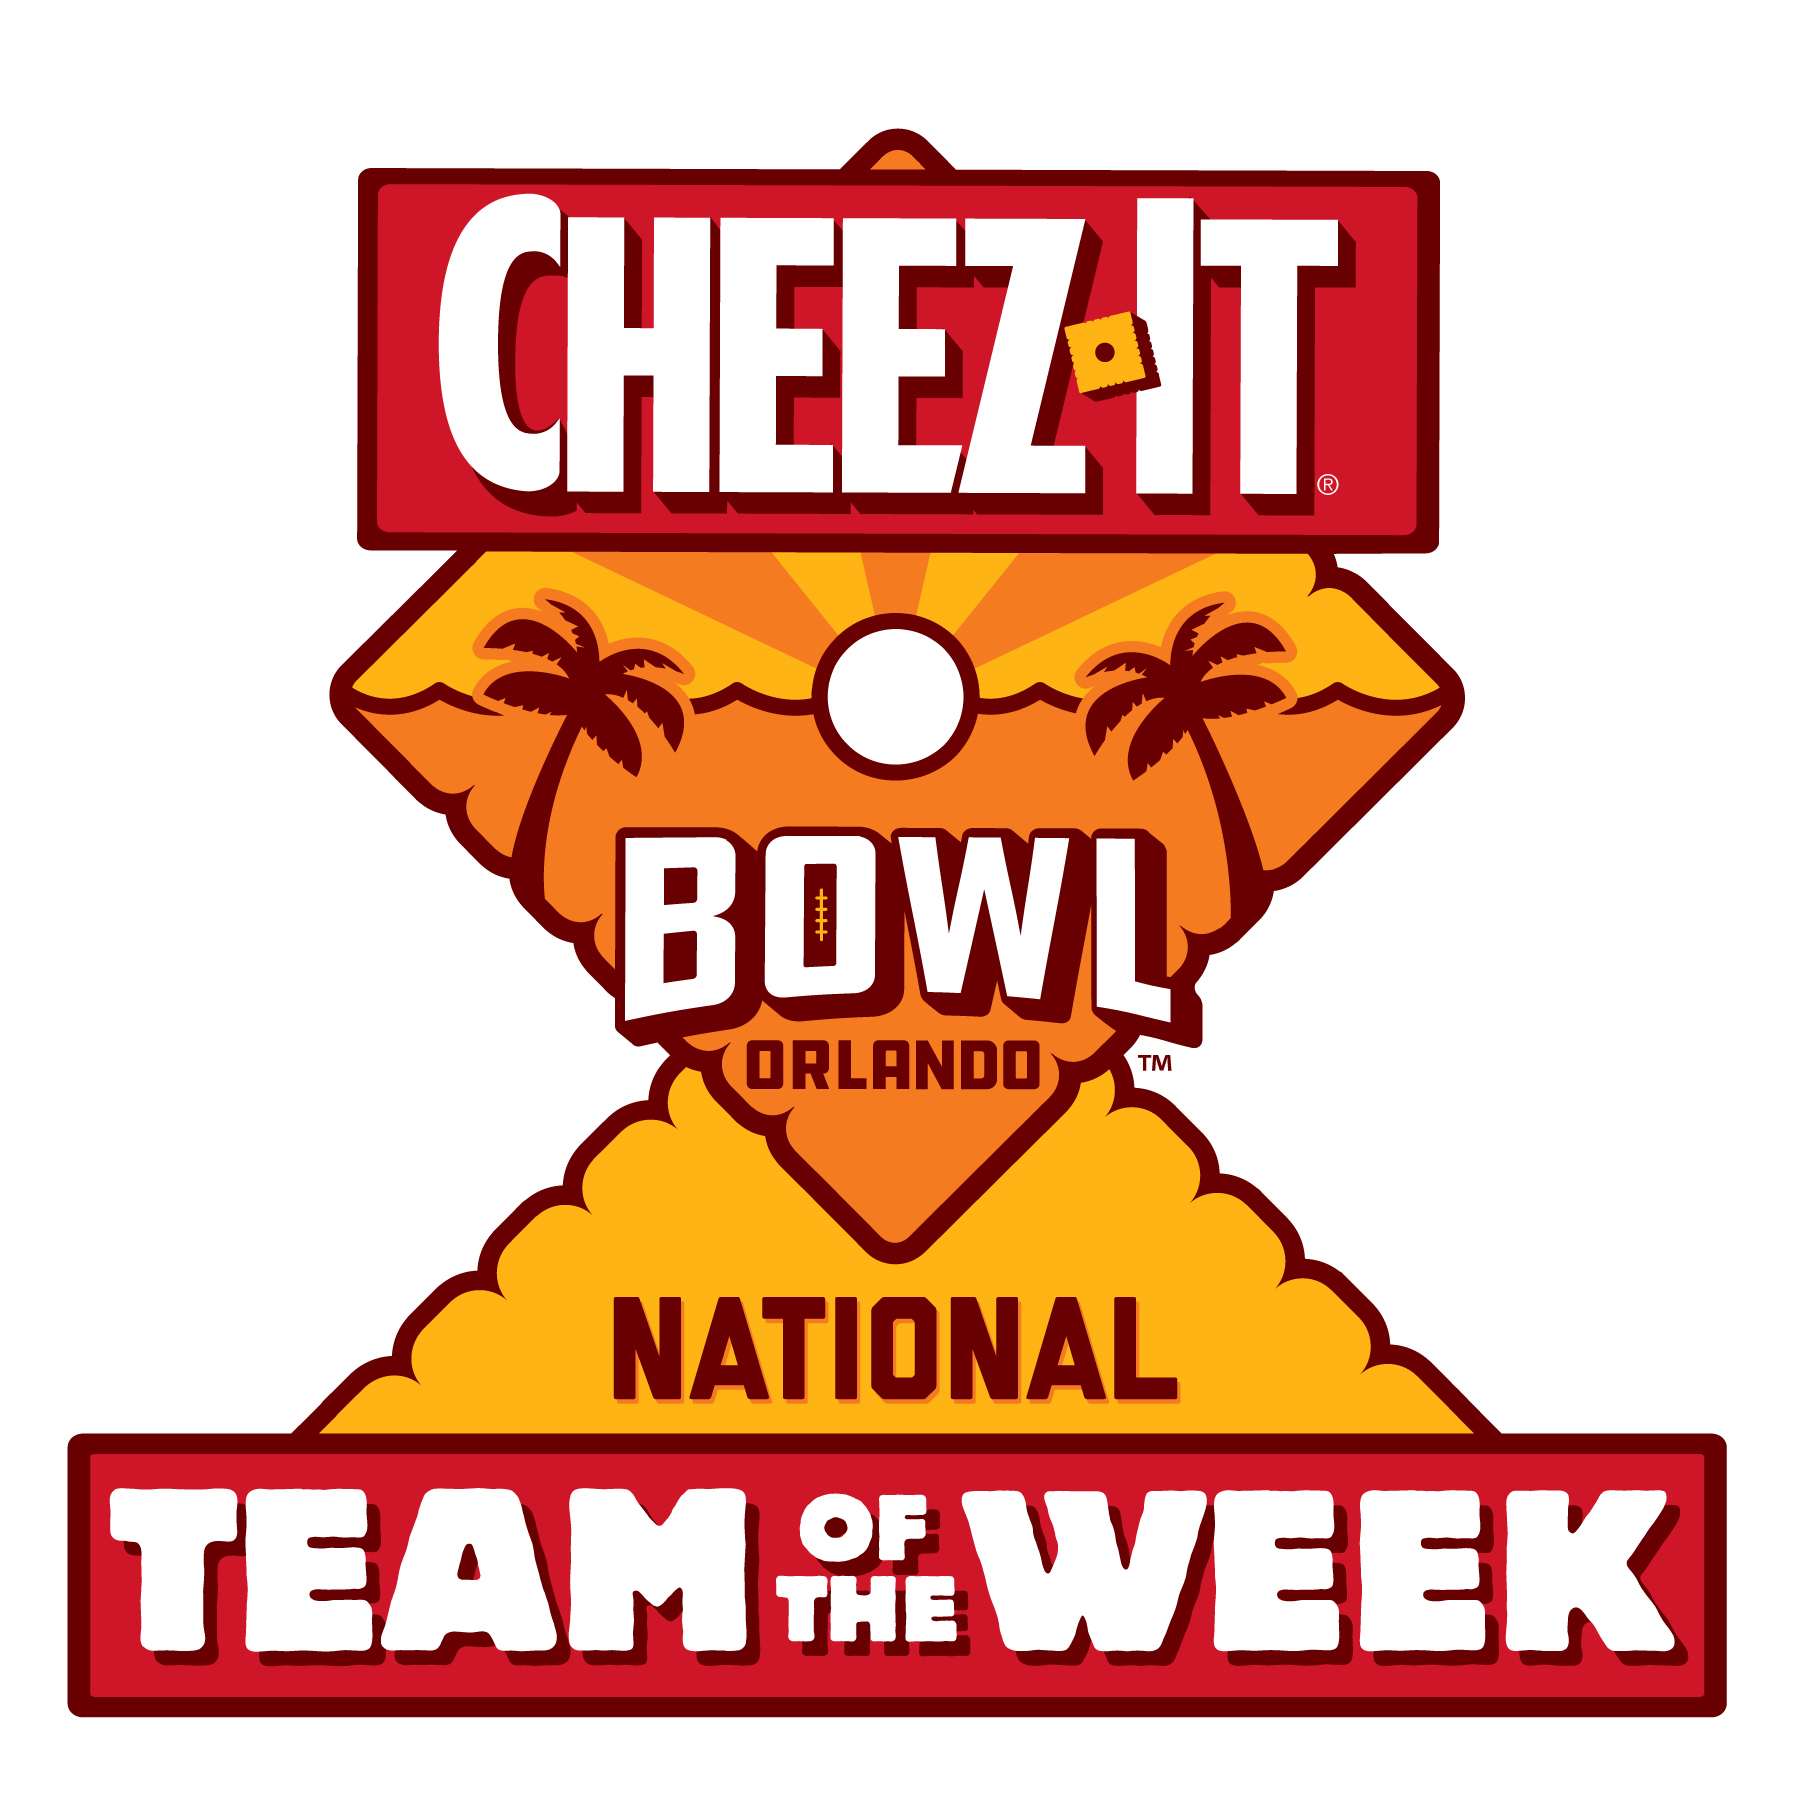 Cheez-It Bowl National Team of the Week logo